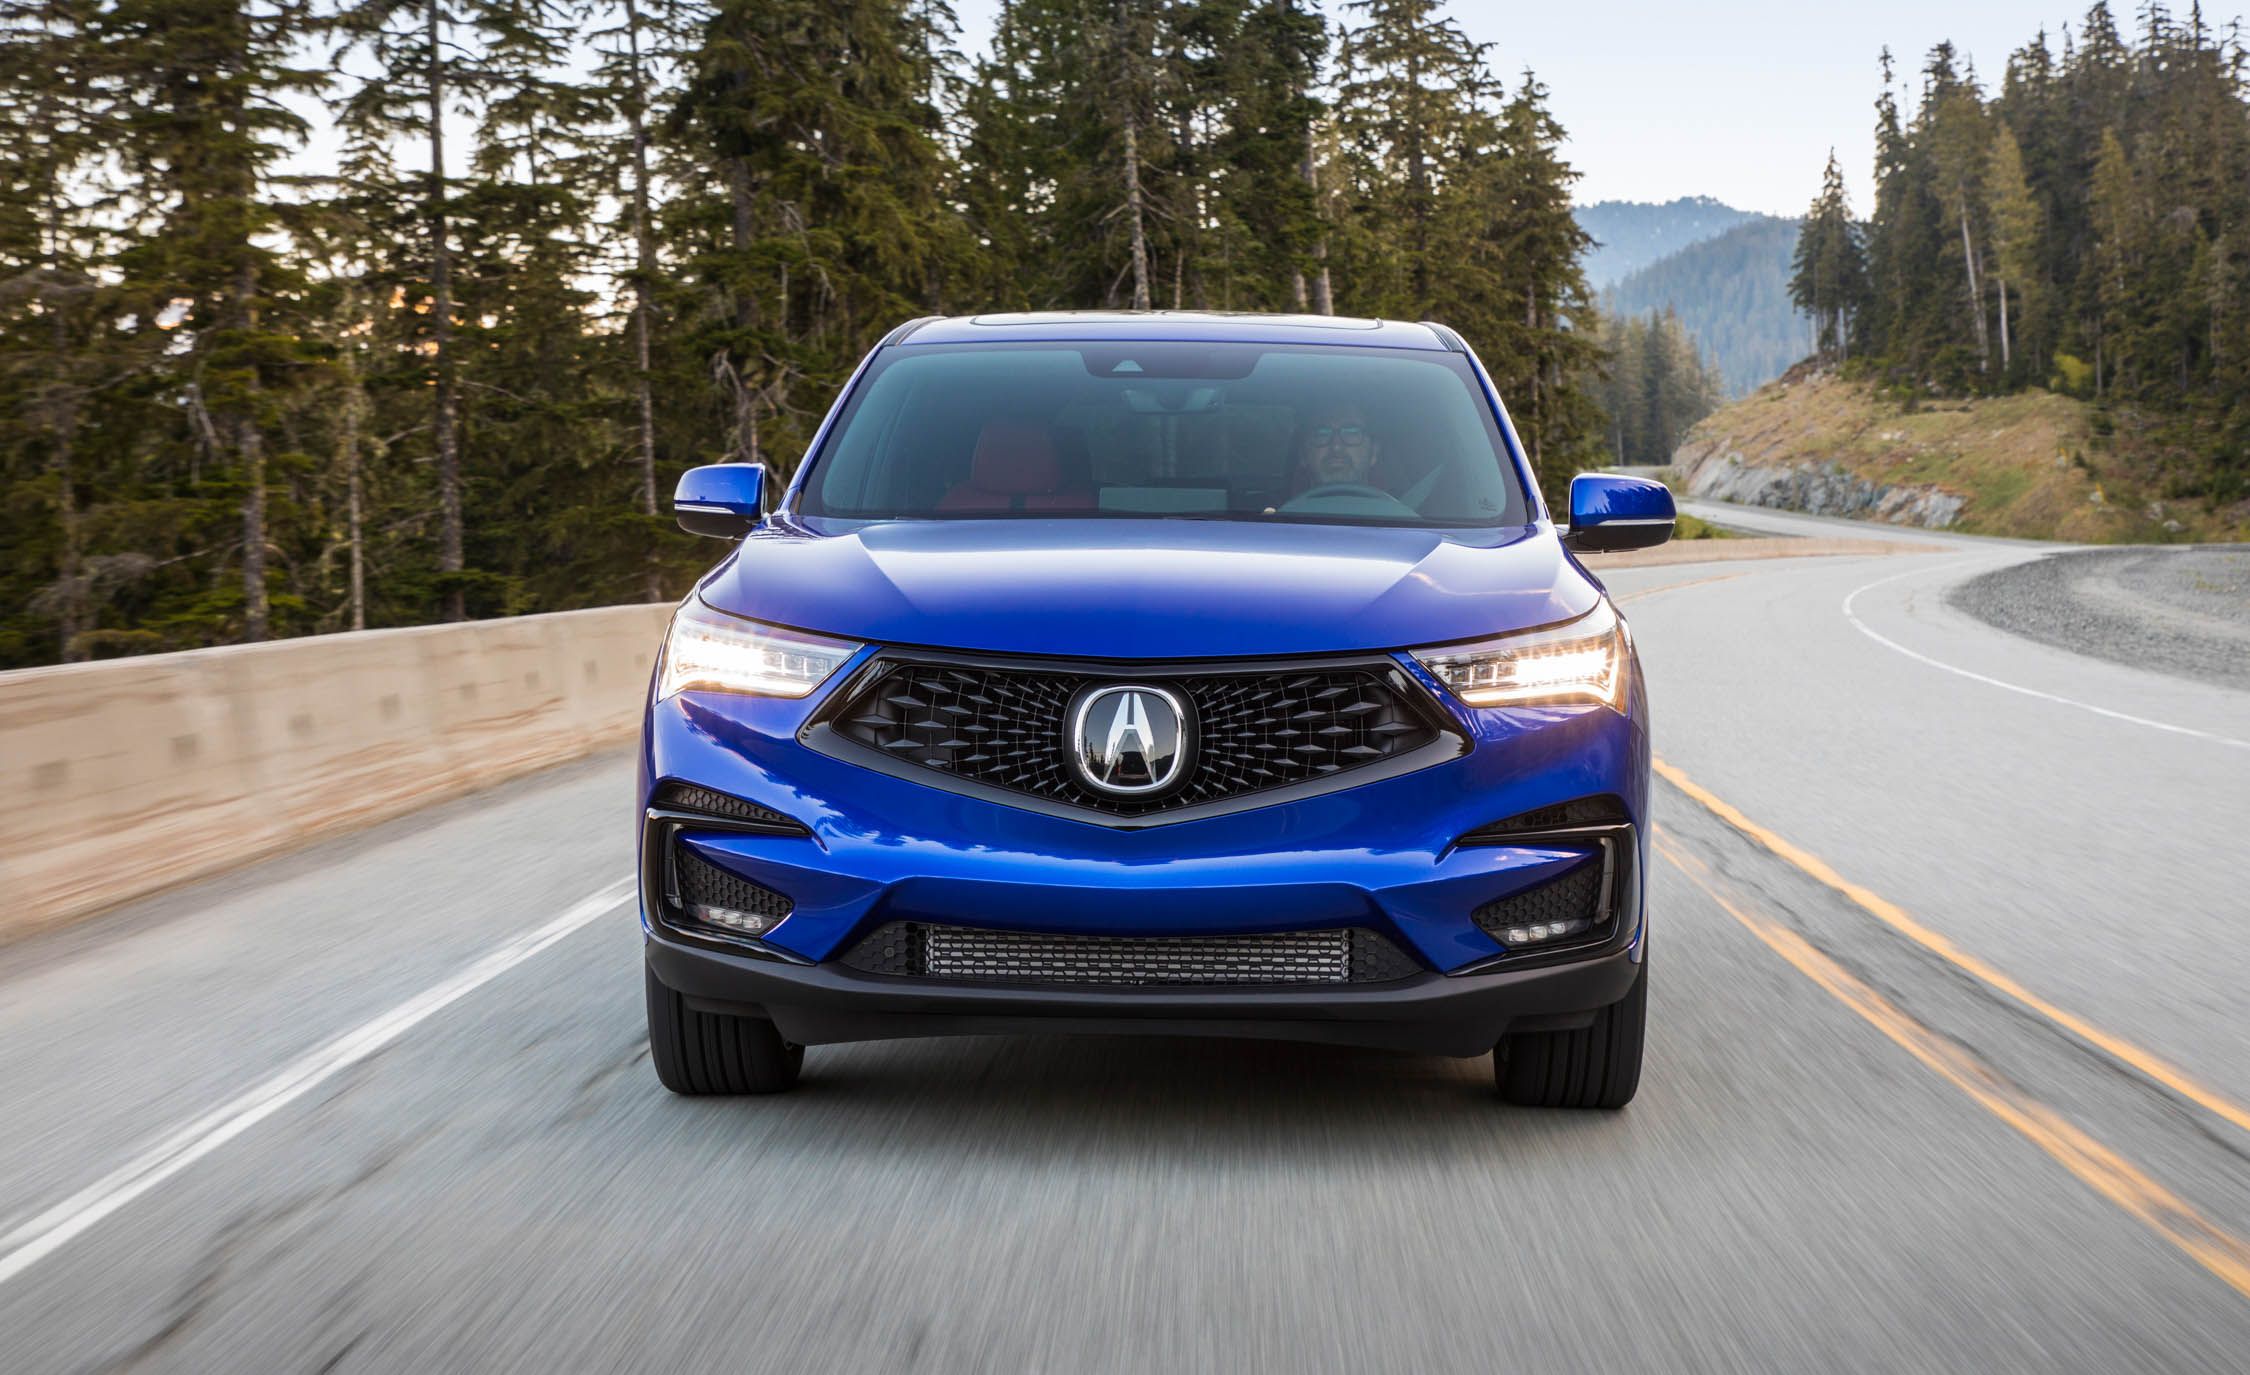 2019 Acura RDX A-Spec Delivers Value, Not Speed